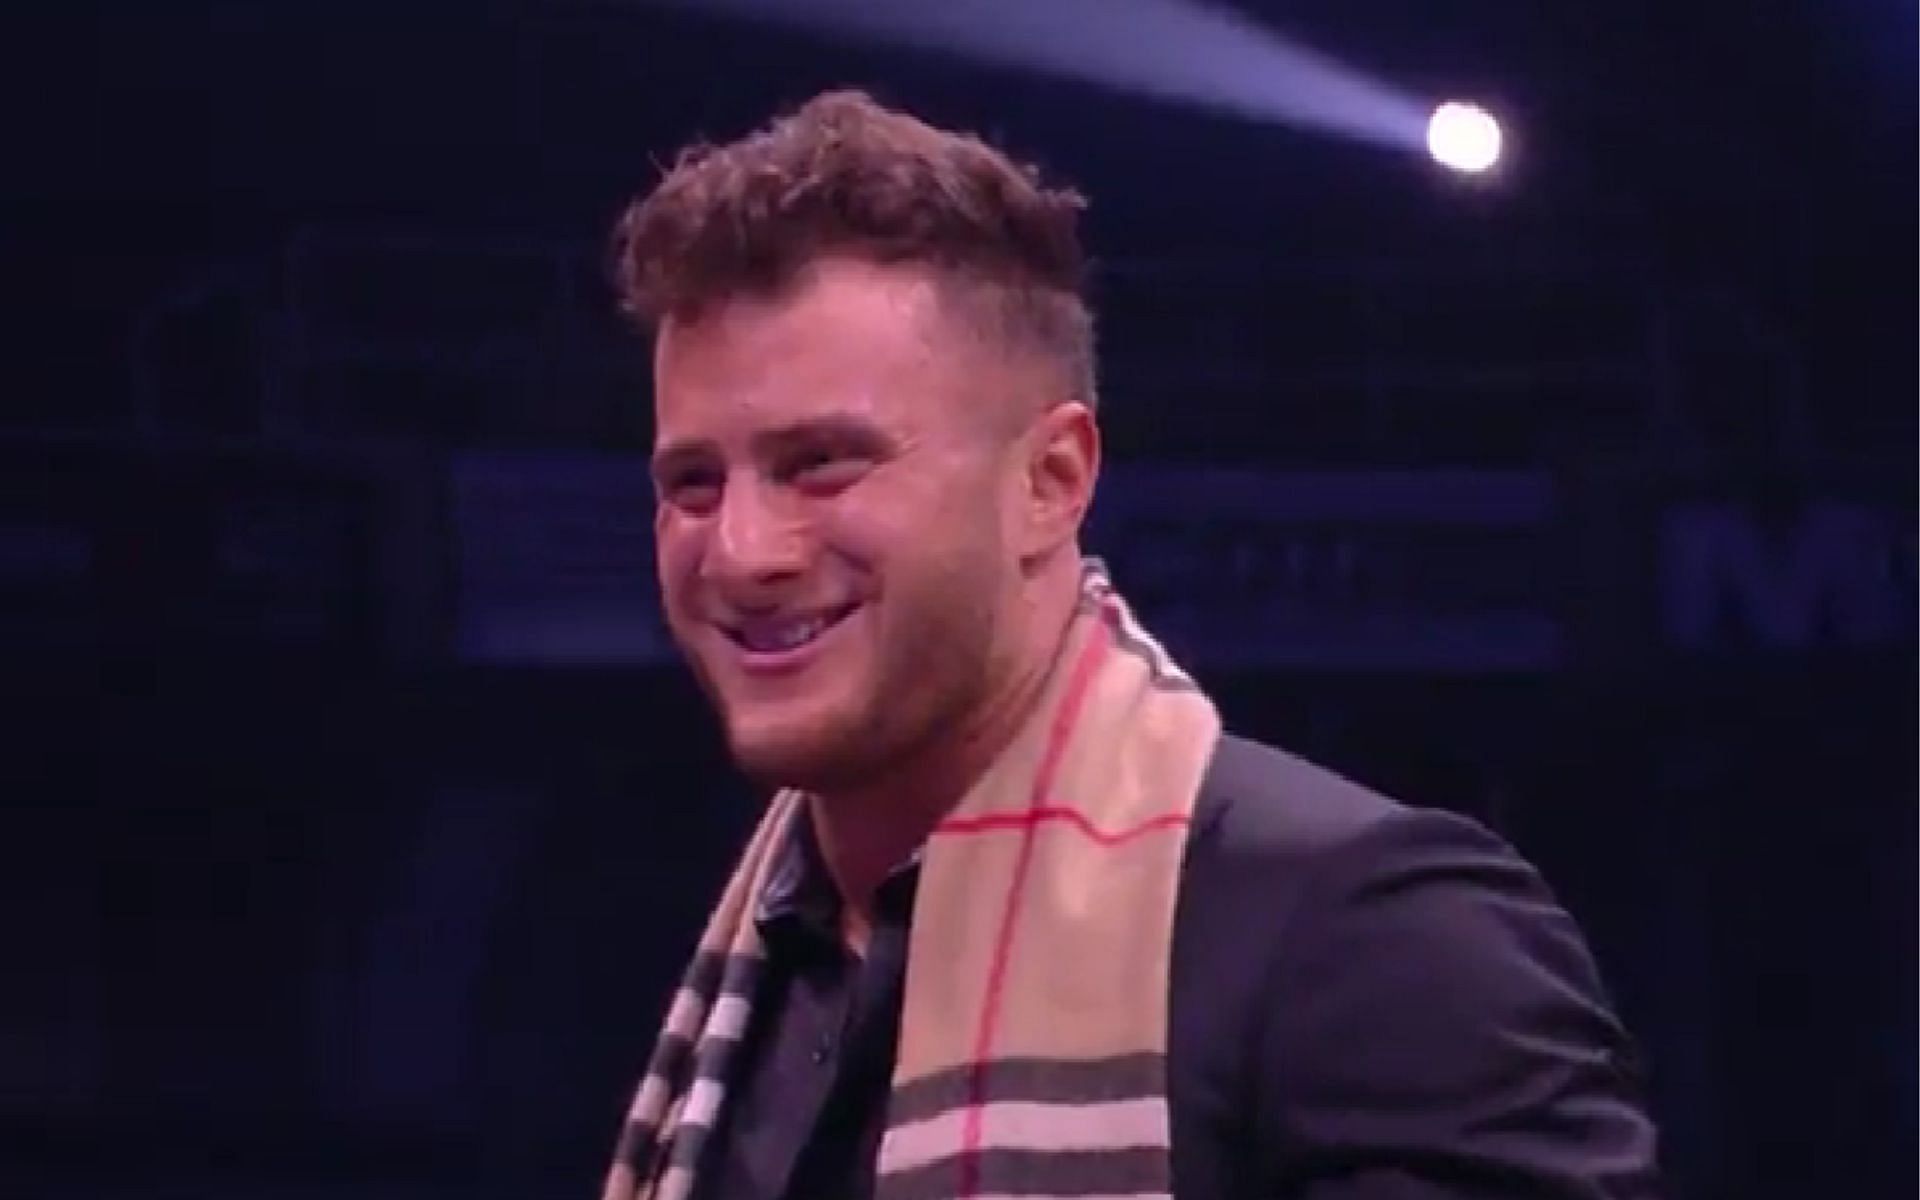 MJF introduced a new stable on AEW Dynamite.